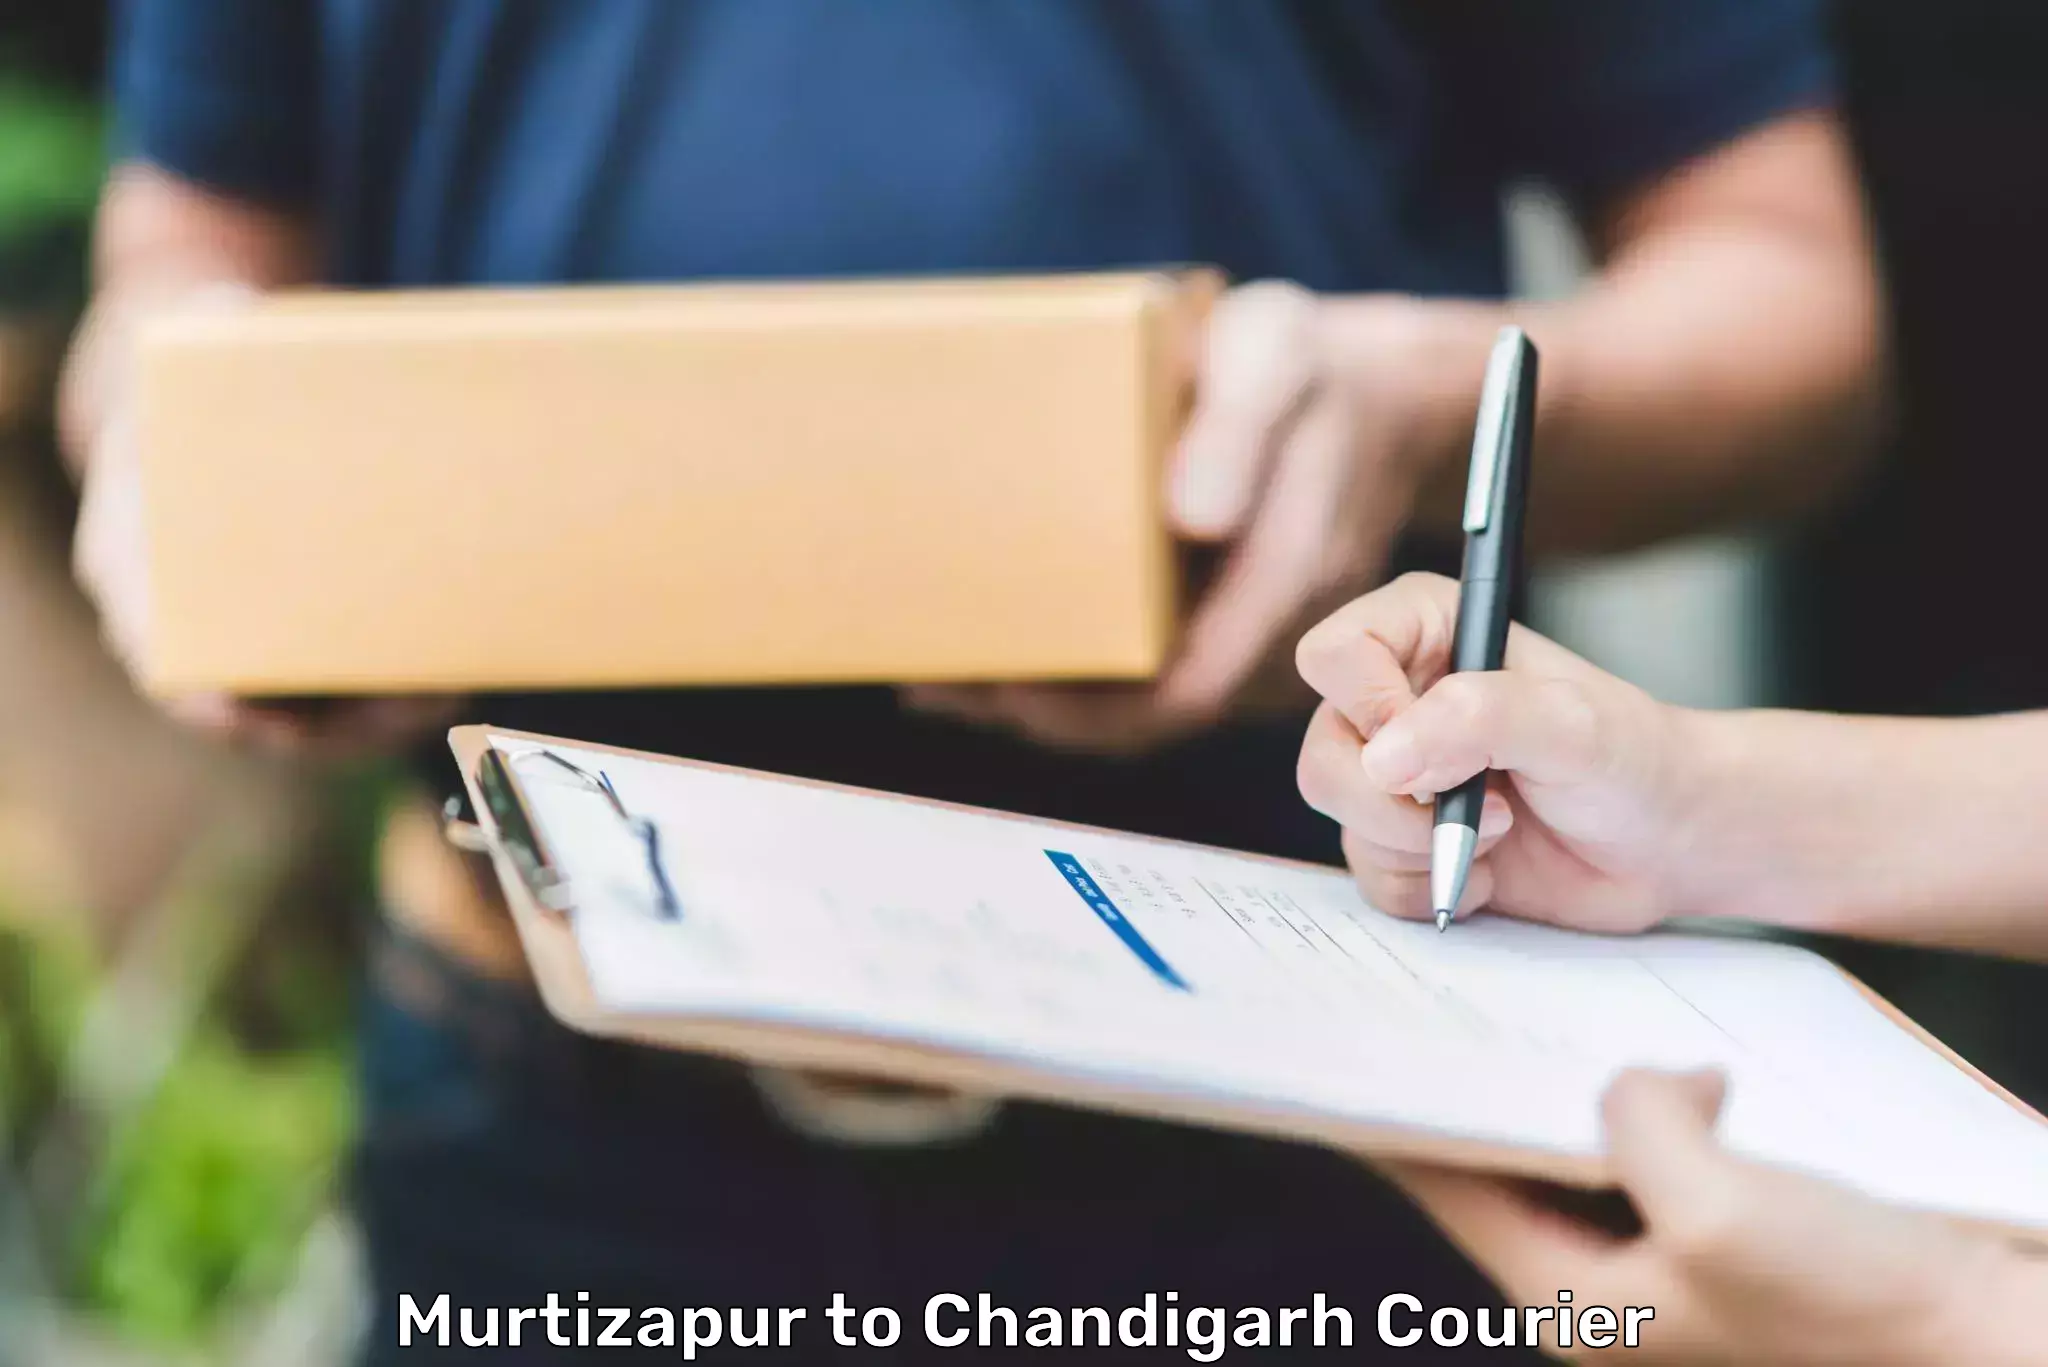 Global courier networks Murtizapur to Chandigarh